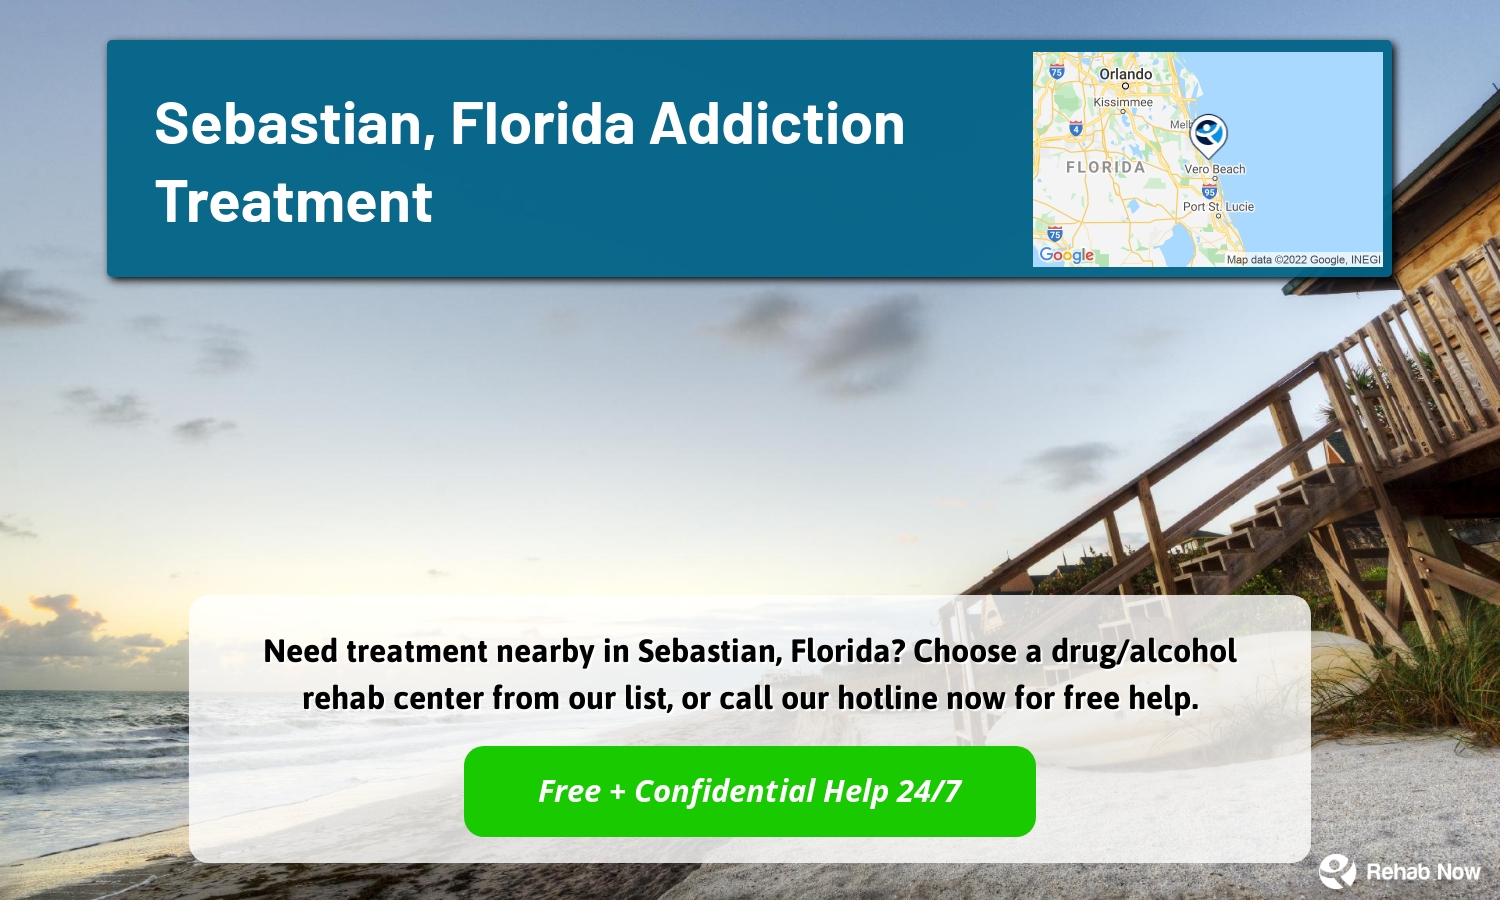 Need treatment nearby in Sebastian, Florida? Choose a drug/alcohol rehab center from our list, or call our hotline now for free help.